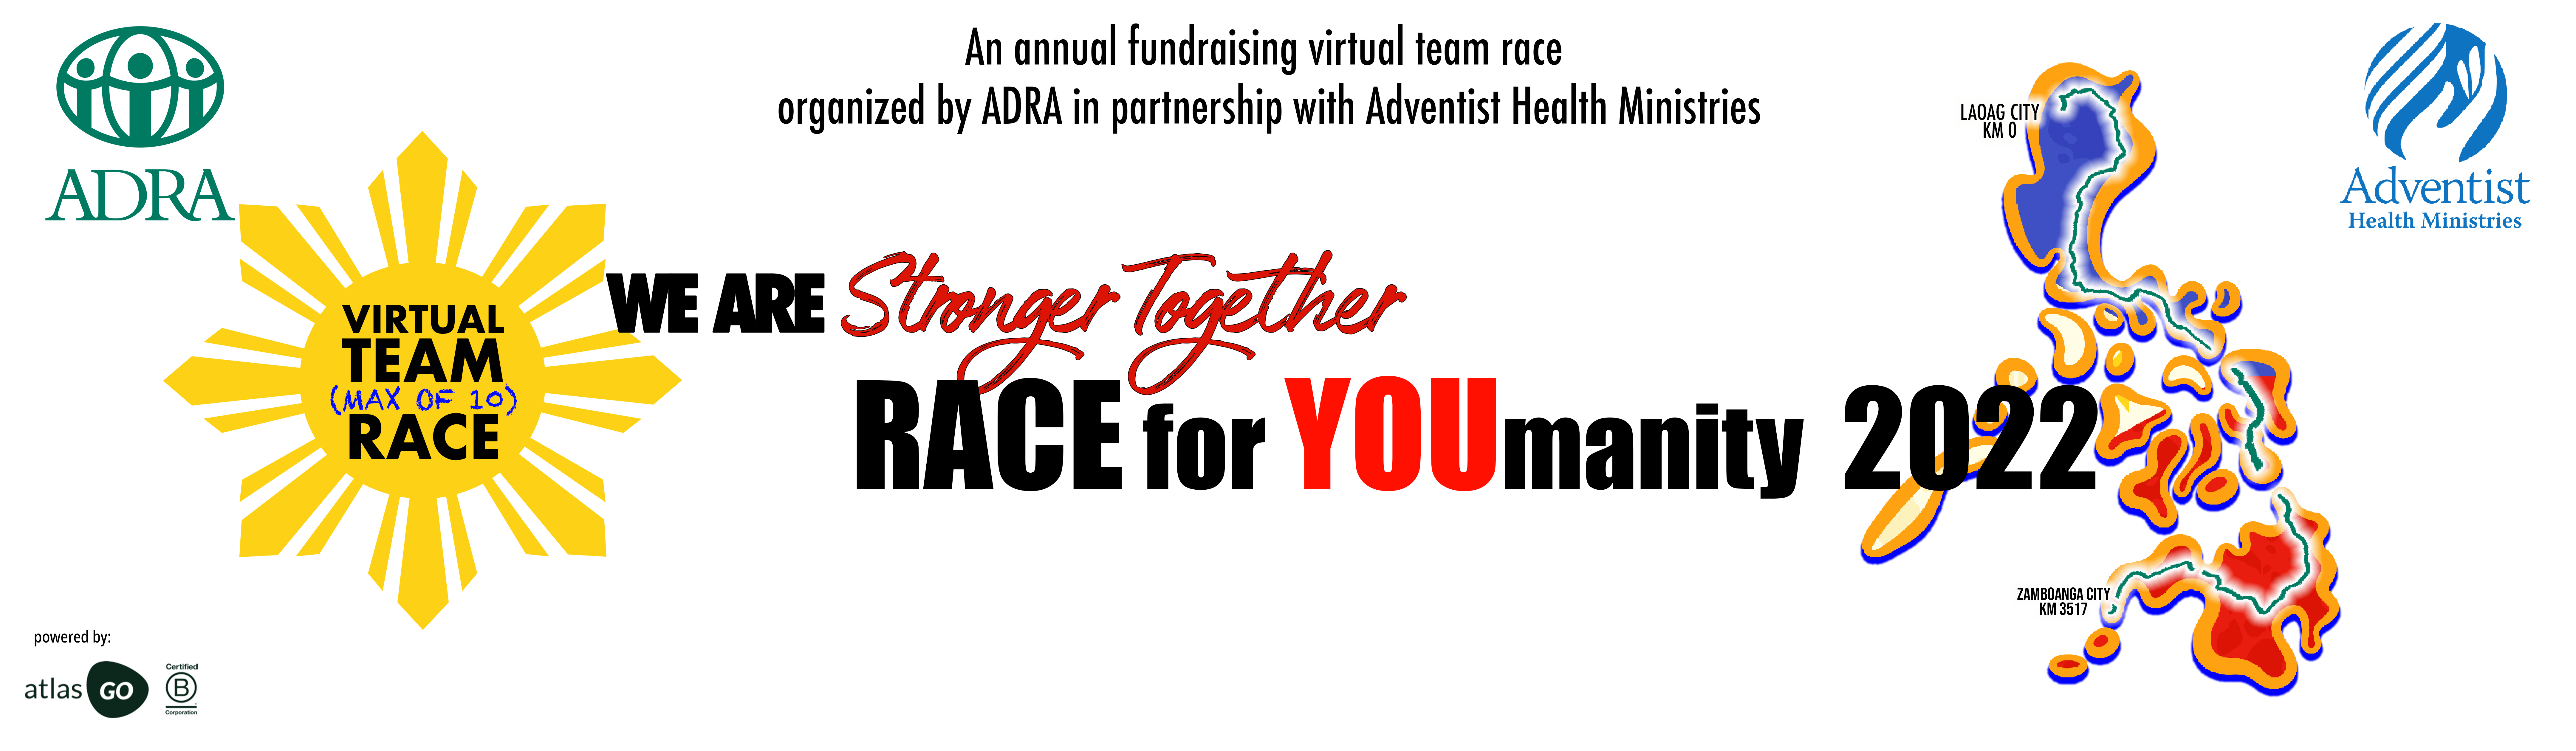 2022.03.25 Race for YOUmanity Header Form - updated